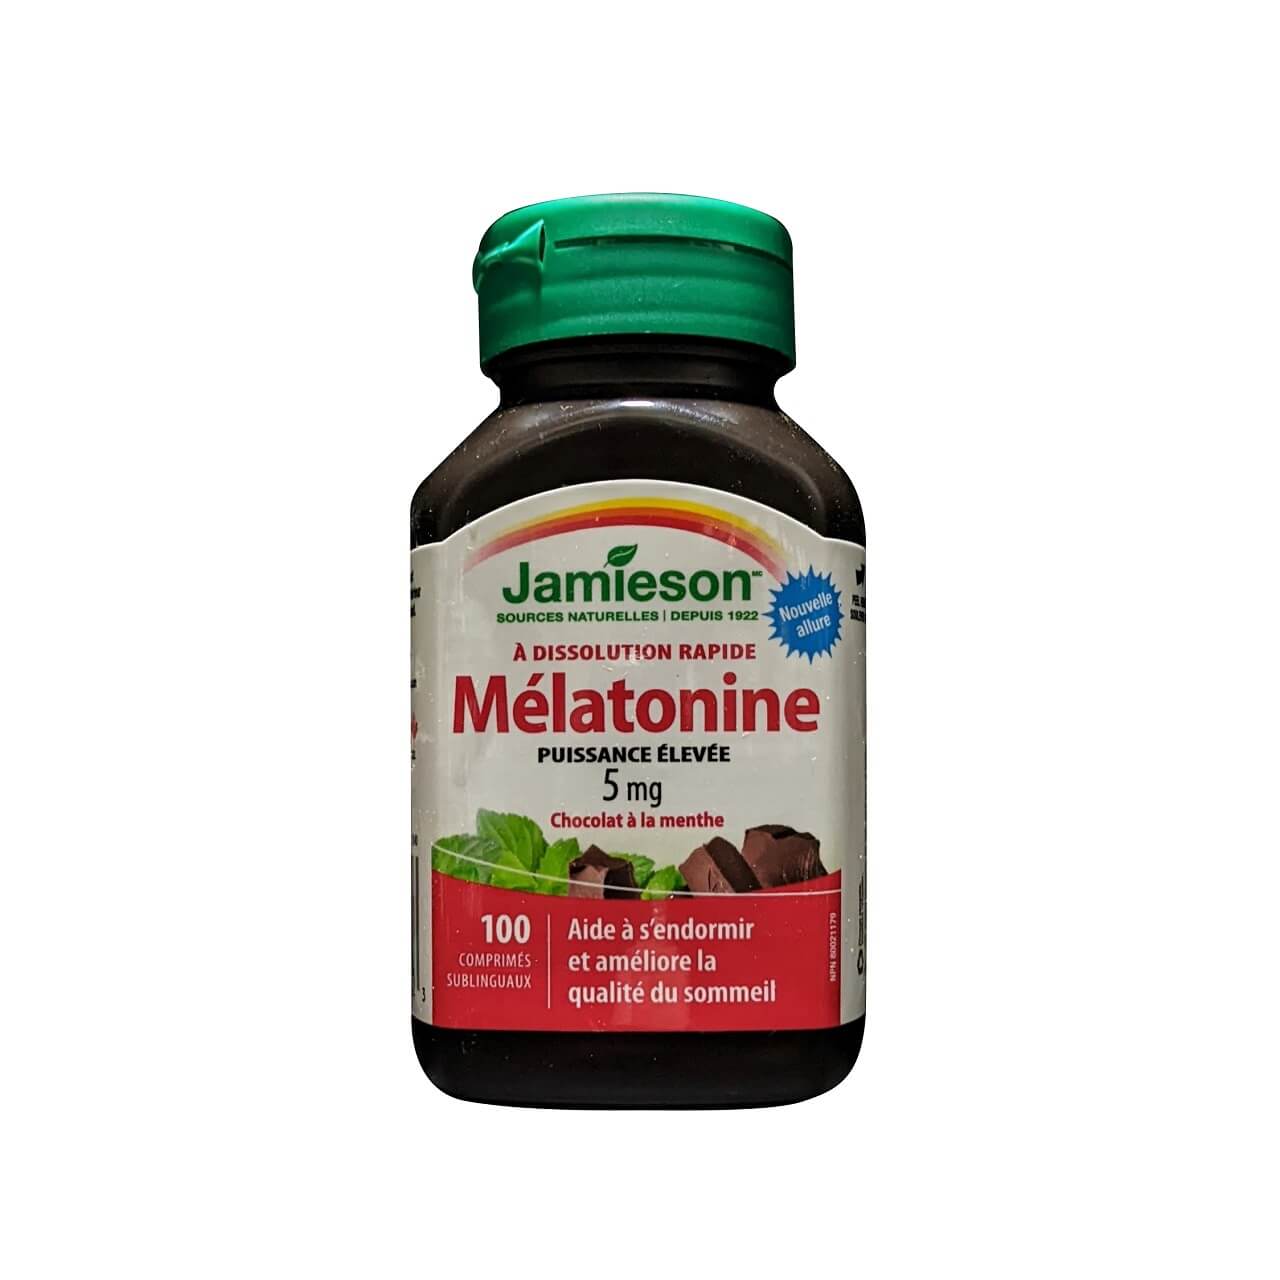 Product label for Jamieson Melatonin Extra Strength 5 mg Fast Dissolving Chocolate Mint (100 tablets) in French